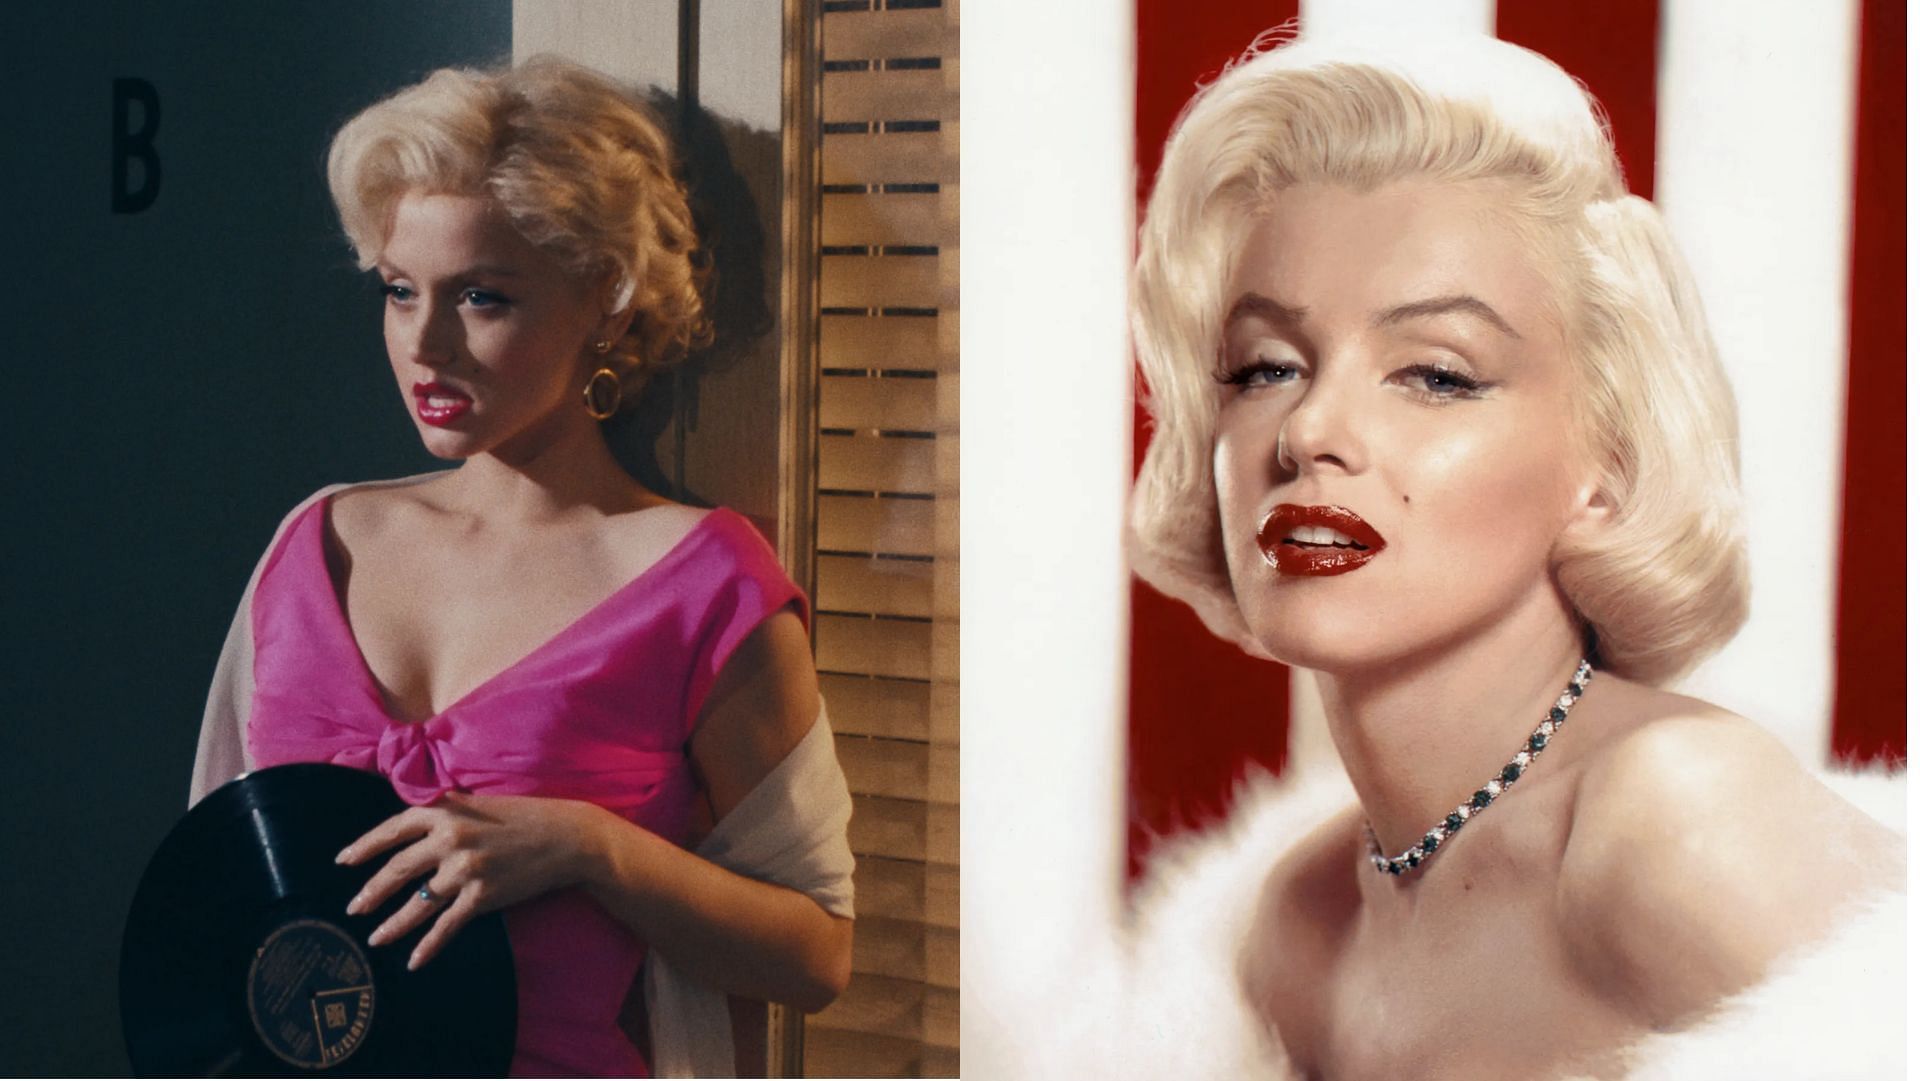 17 Actresses Who've Played Marilyn Monroe